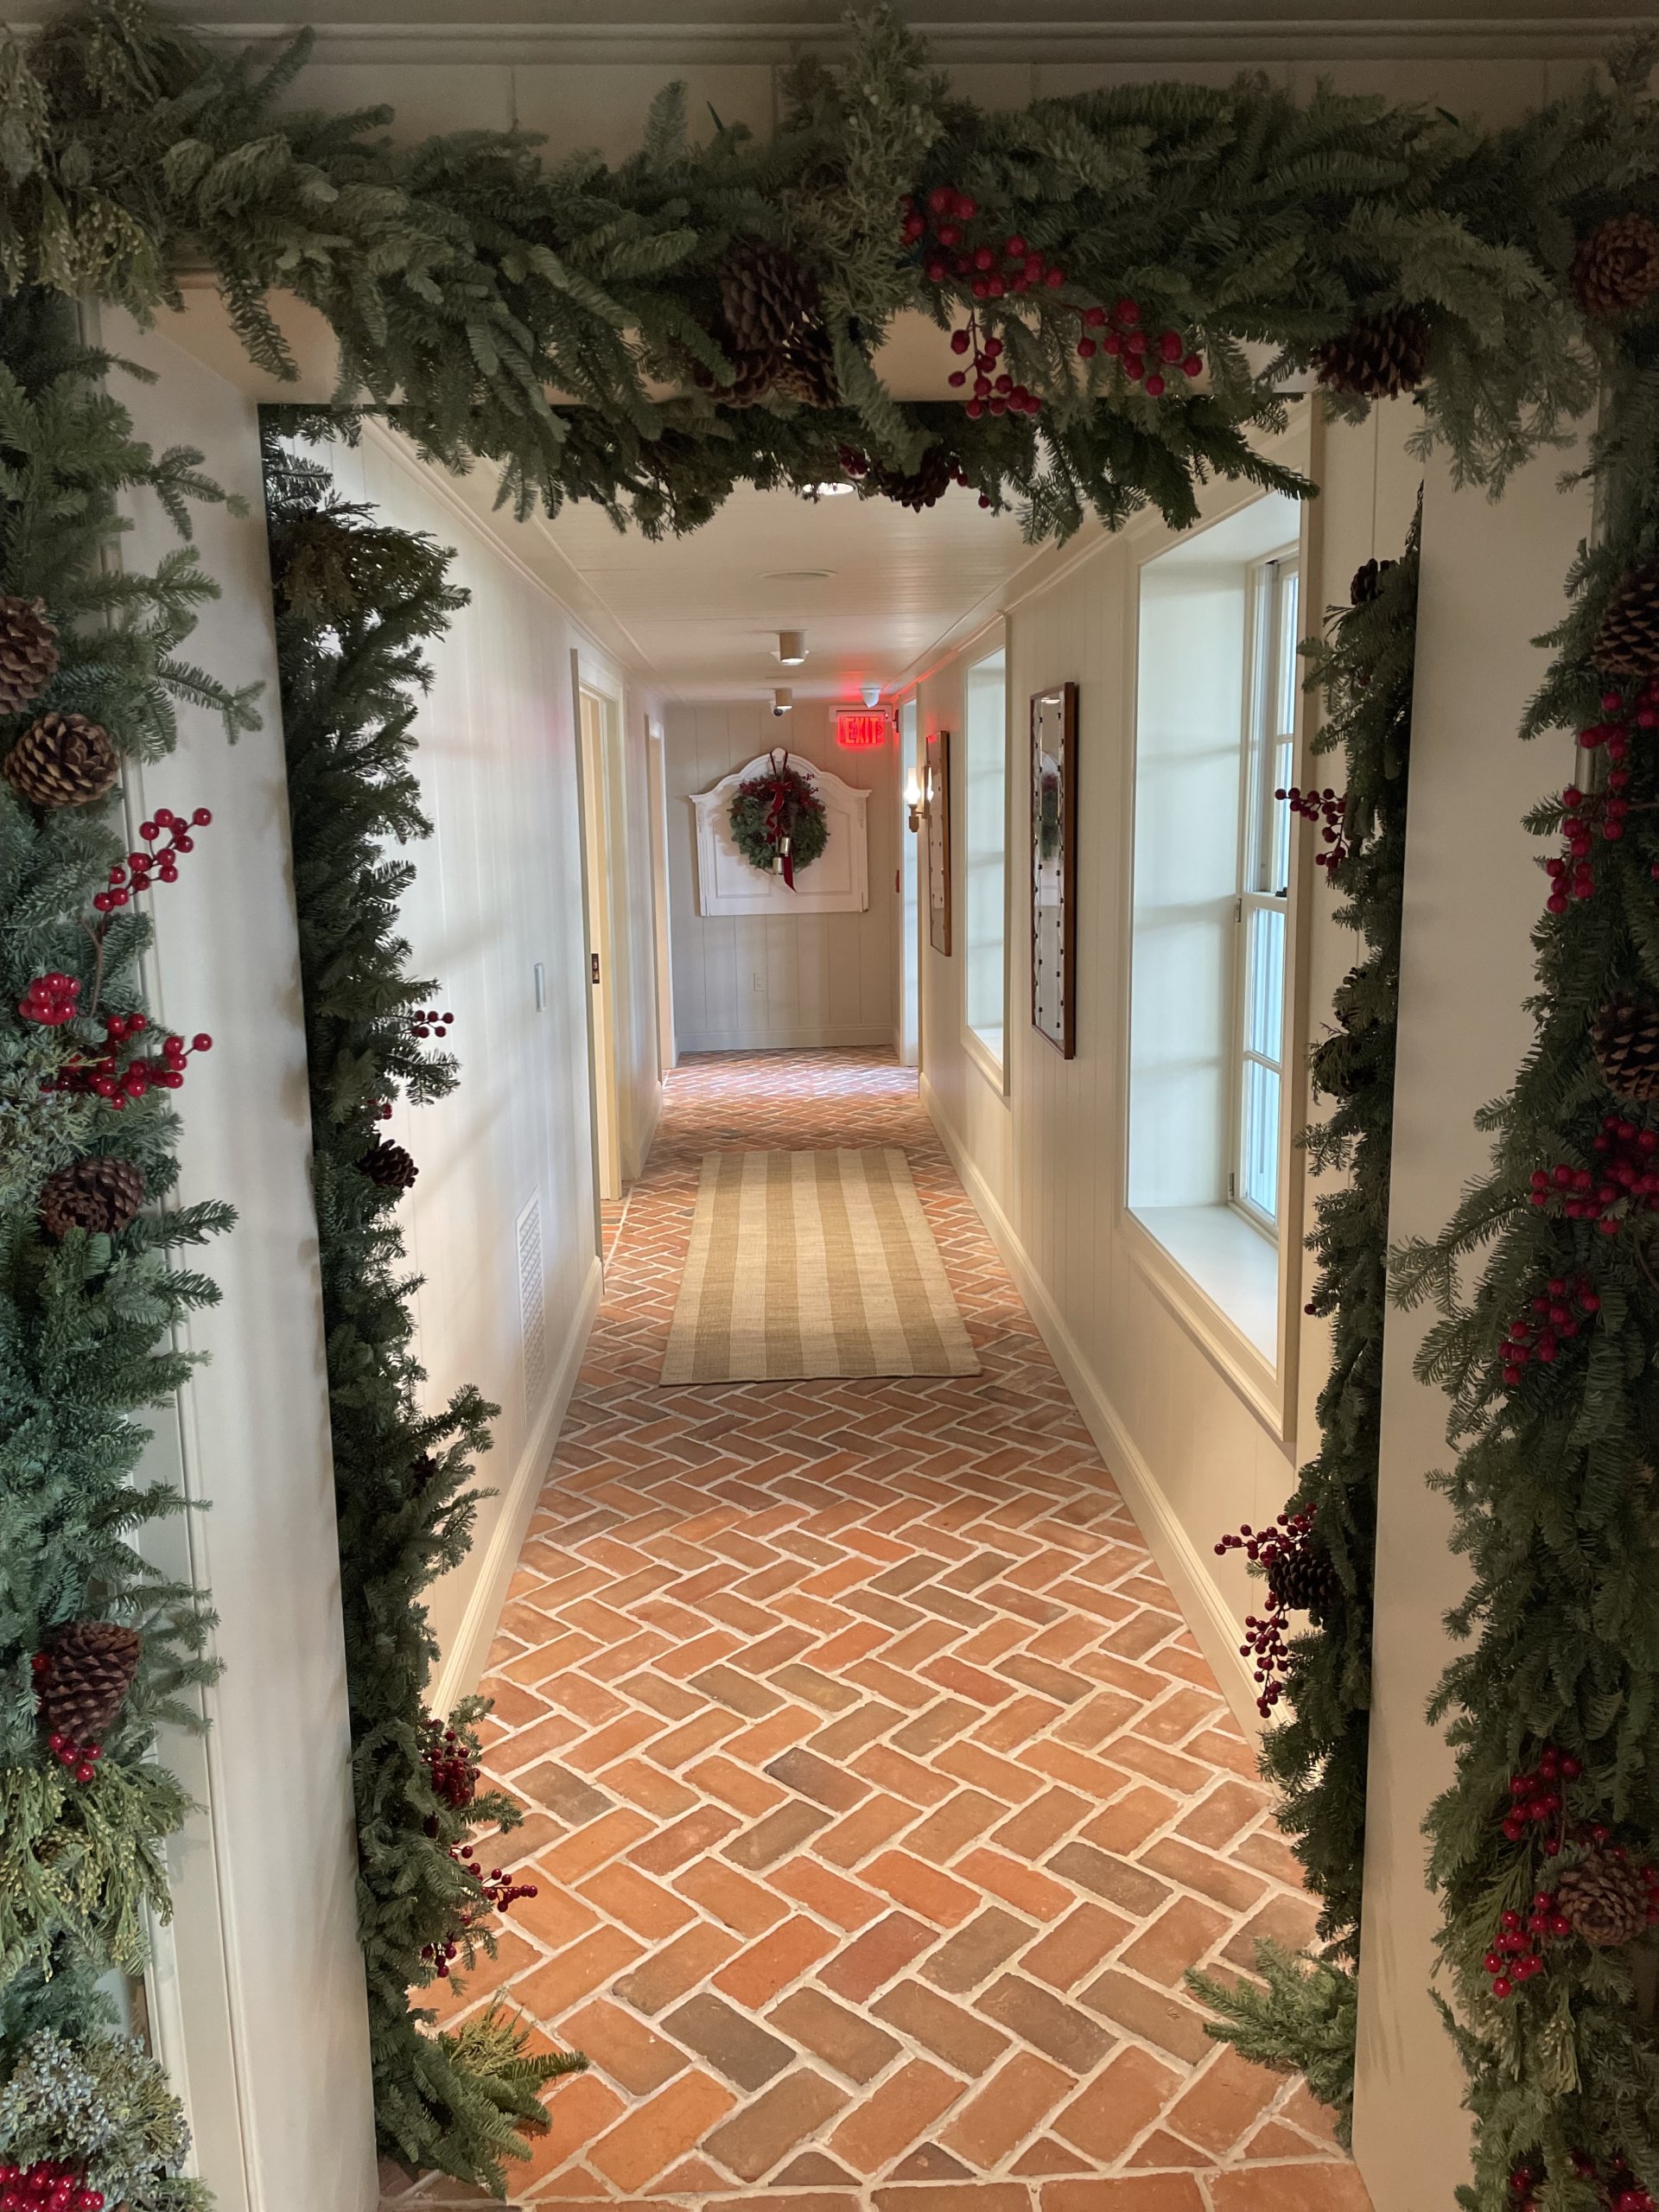 Canoe Place Inn & Cottages halls are decked for the holidays